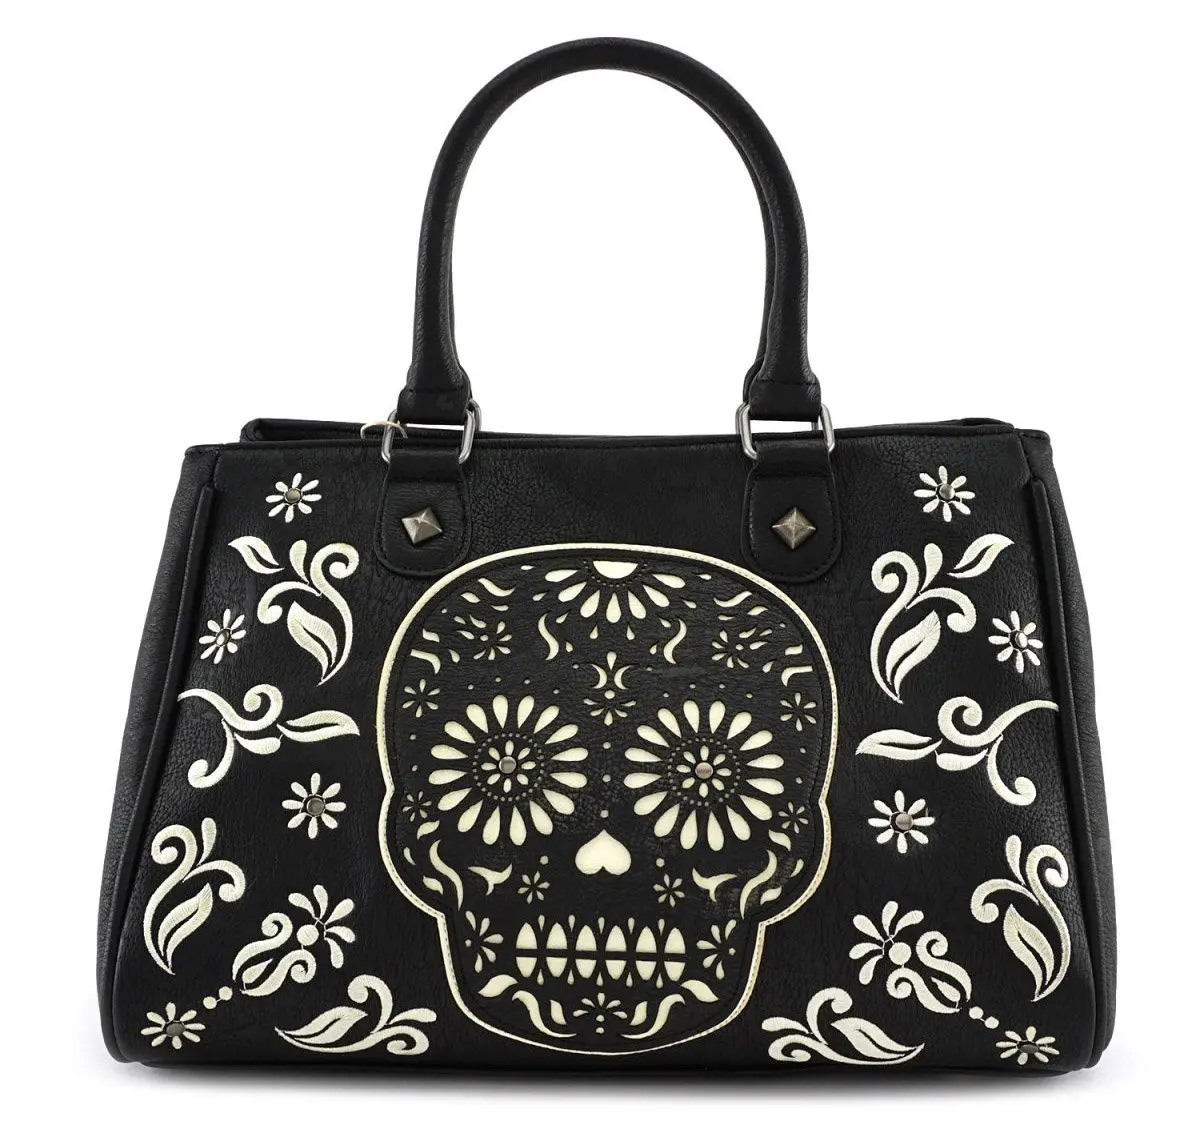 Buy Loungefly Quilted Embroidered Sugar Skull Tote Bag in Cheap Price ...